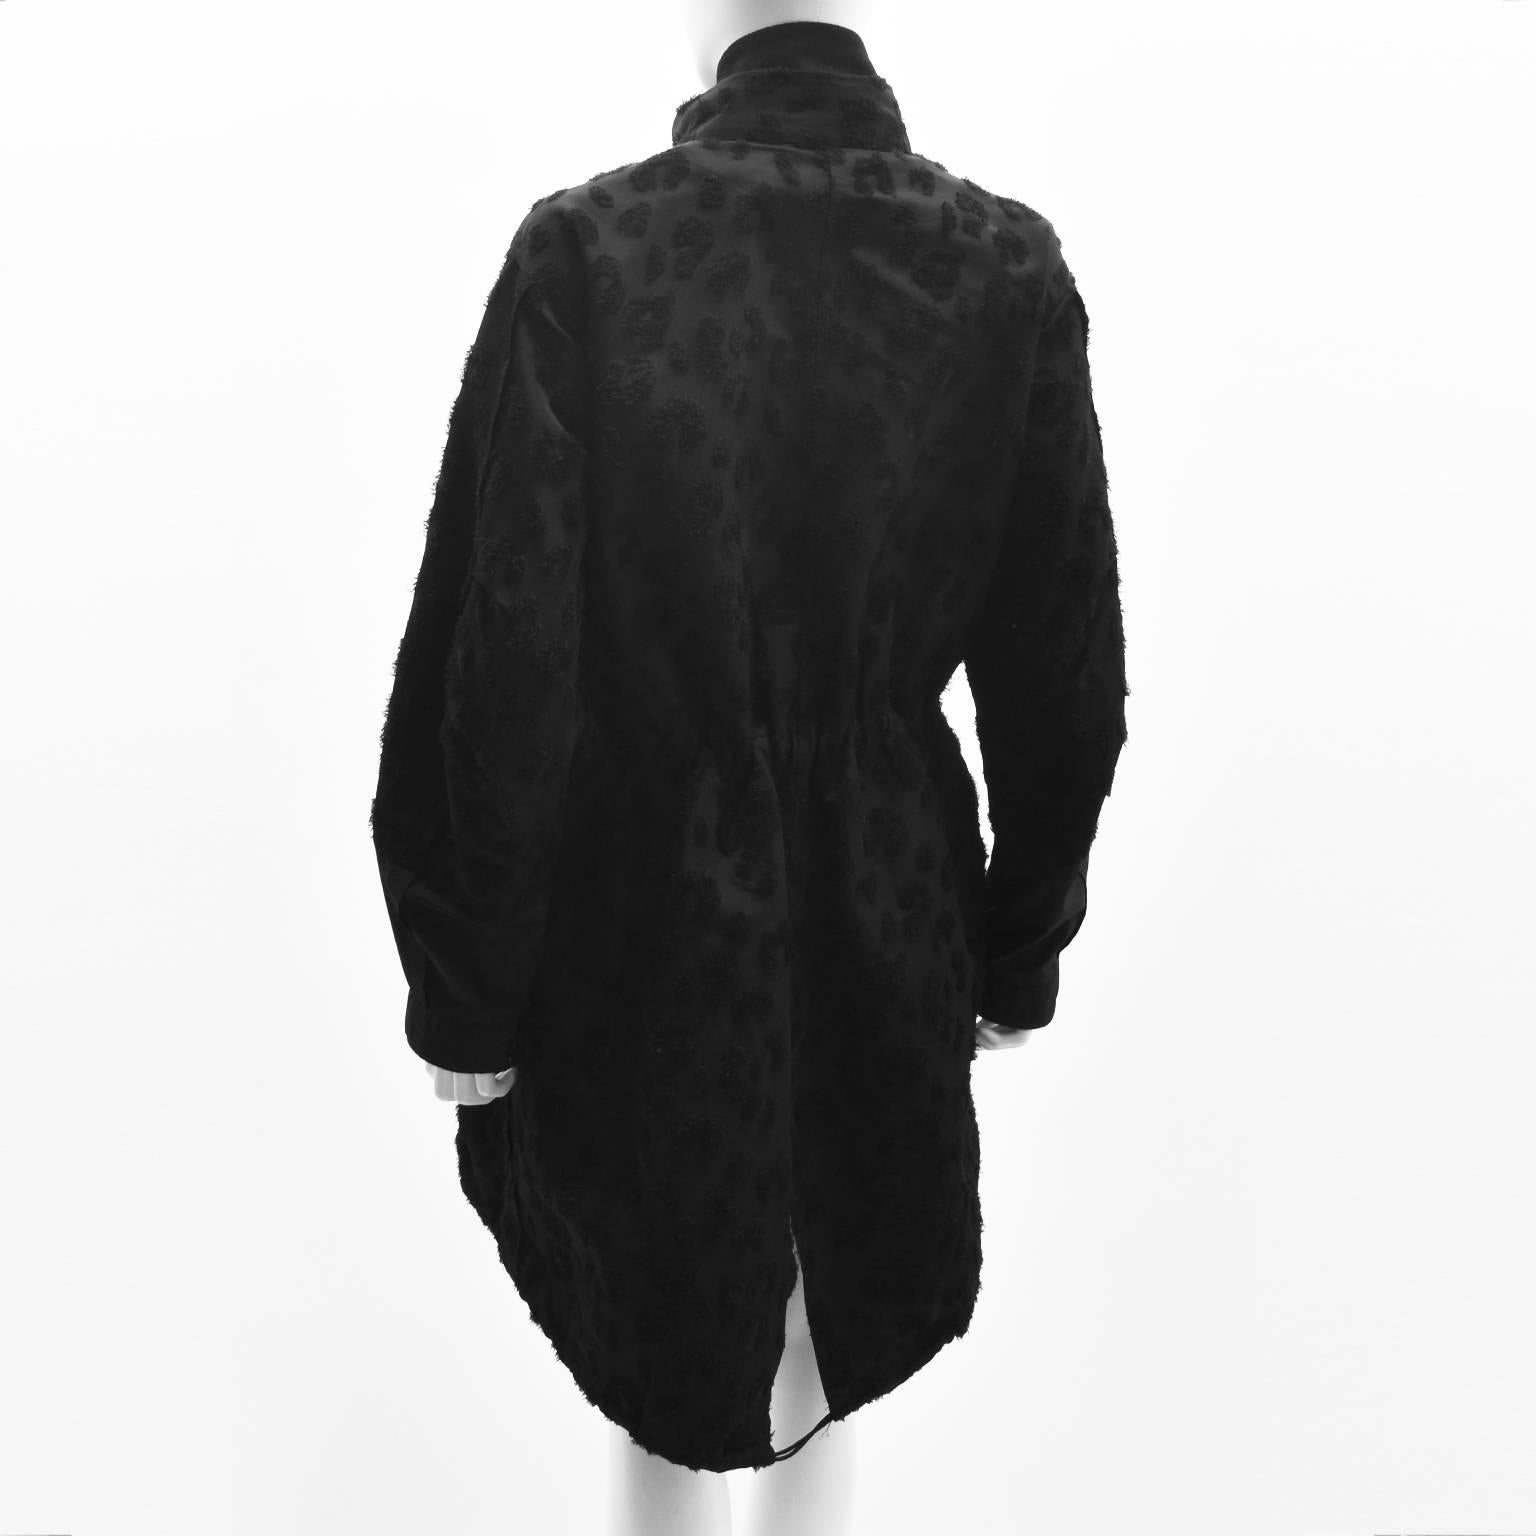 Phillip Lim Black Double Layer Parka Coat with Allover Textured Leopard Print  For Sale 1